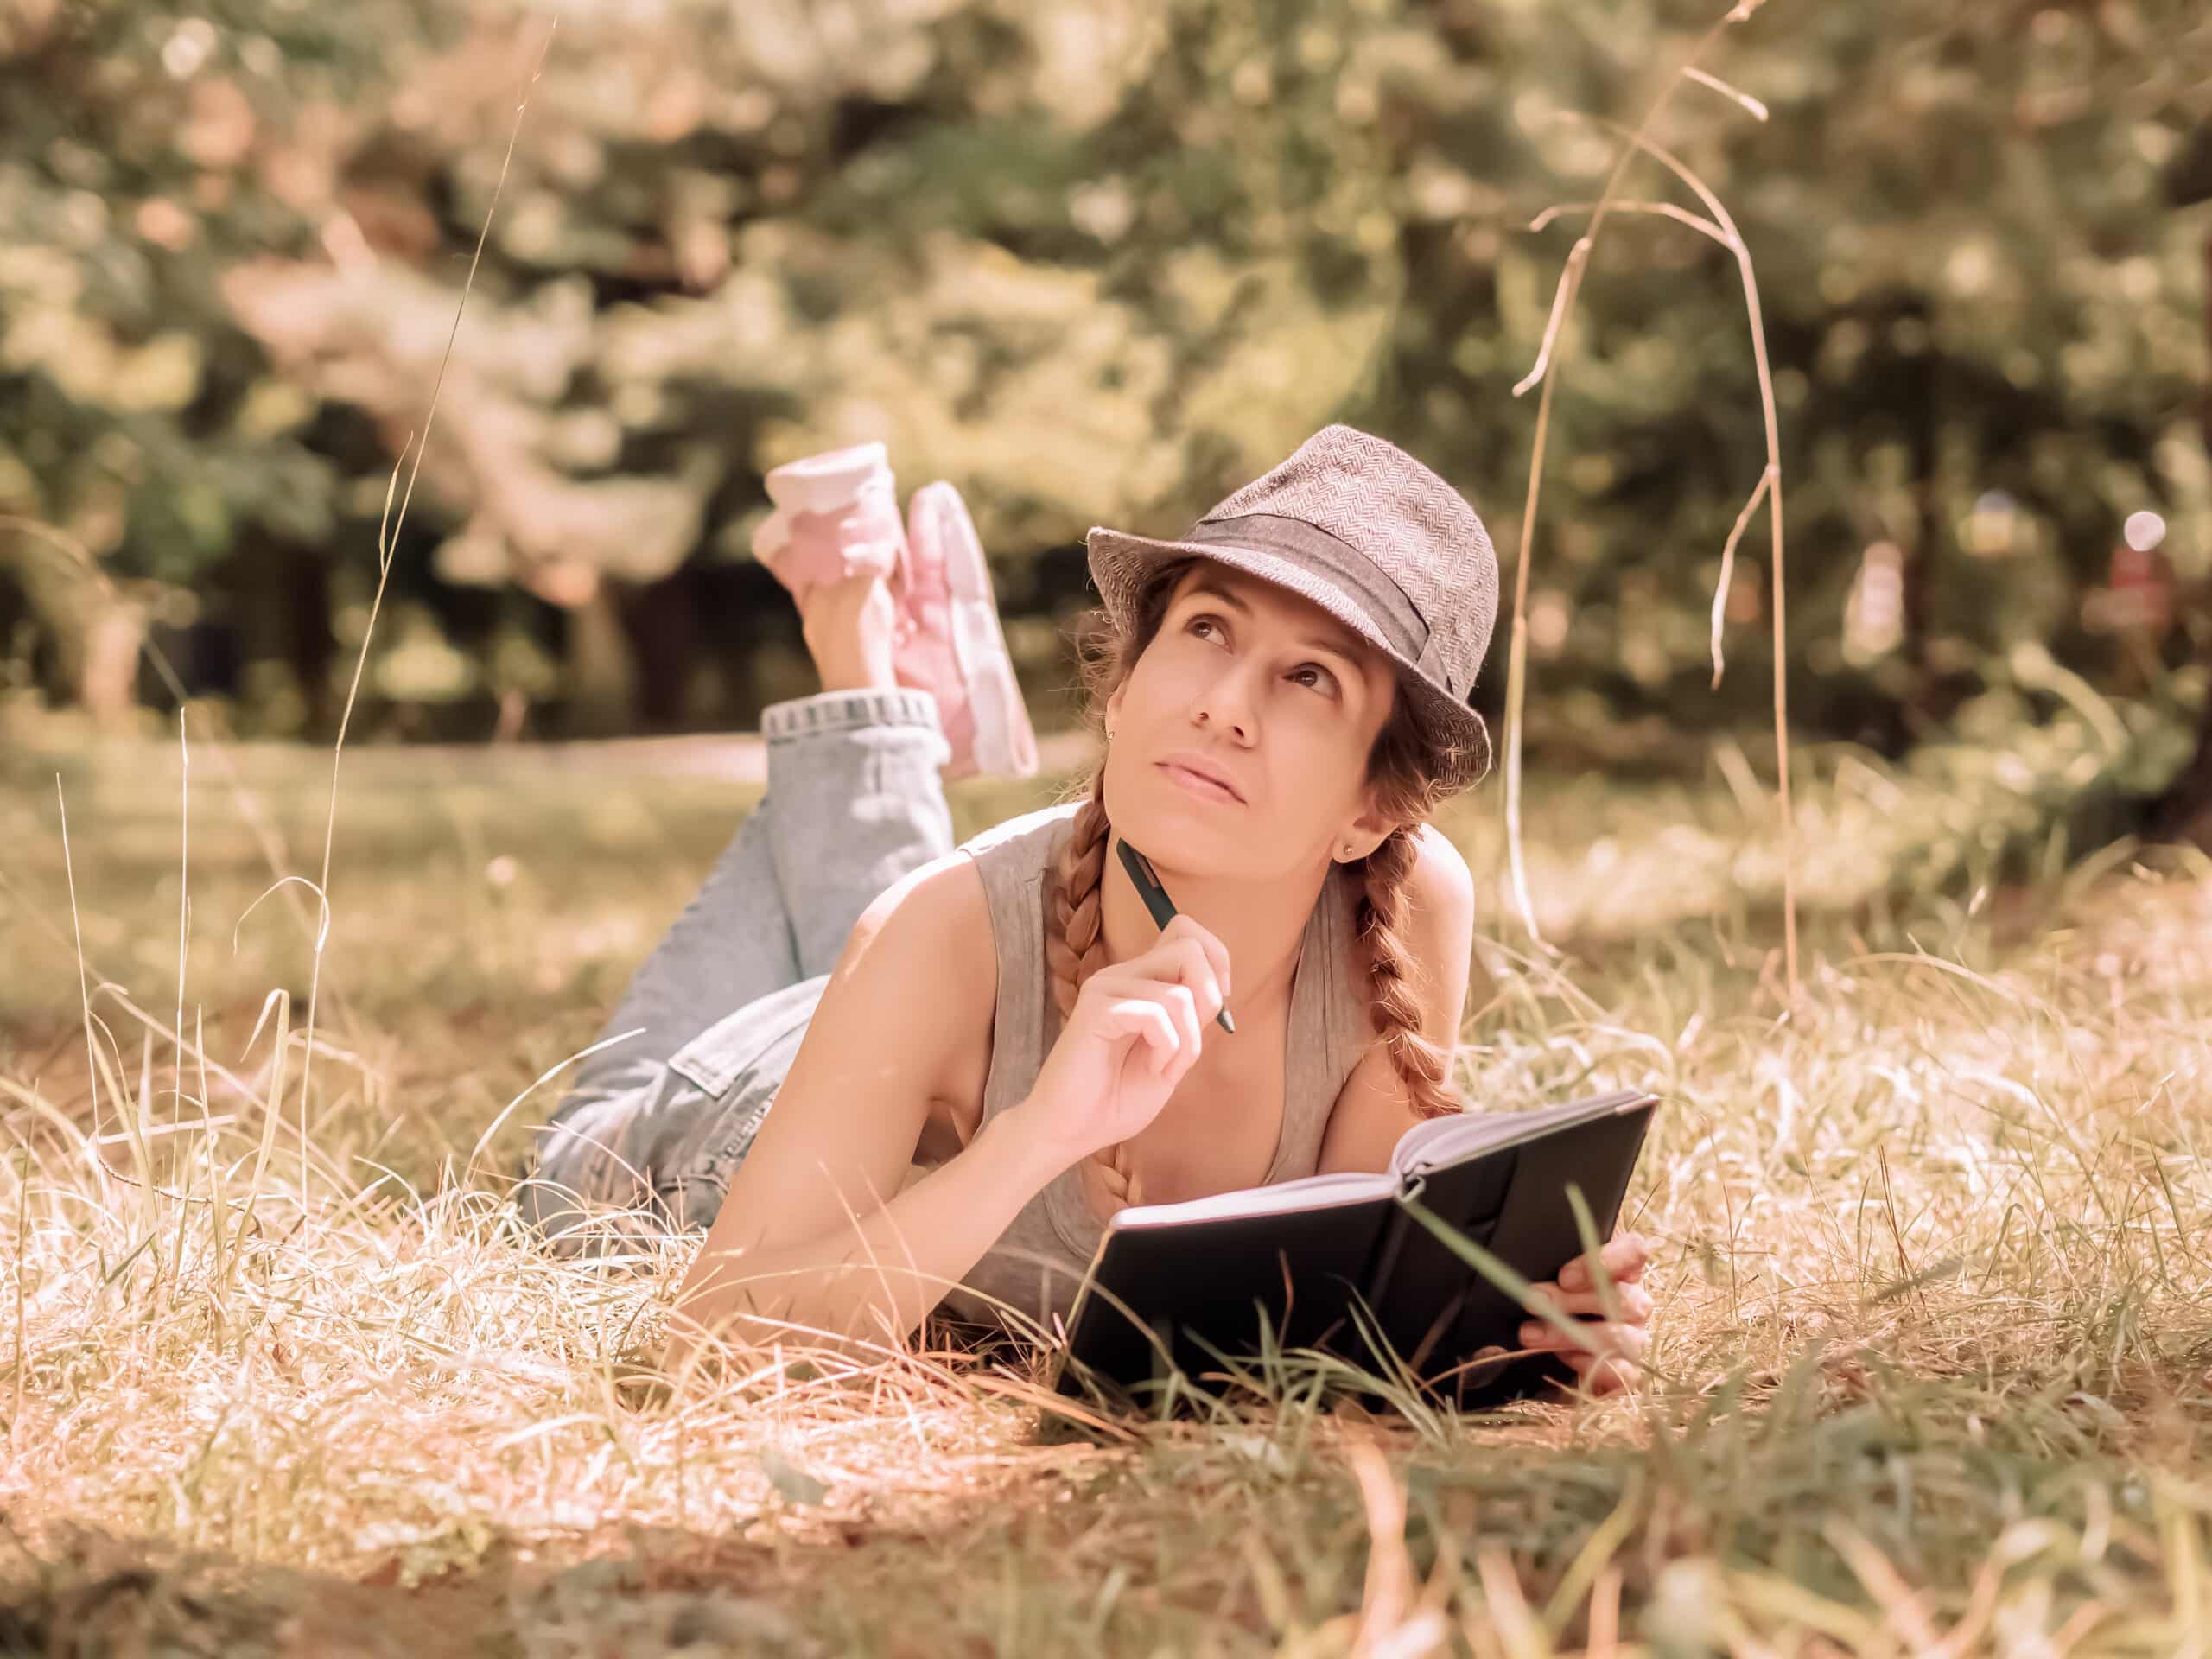 A young woman in a hat lies in the grass in a sunny forest and looks up thoughtfully, holding a pen and a notebook in her hands.